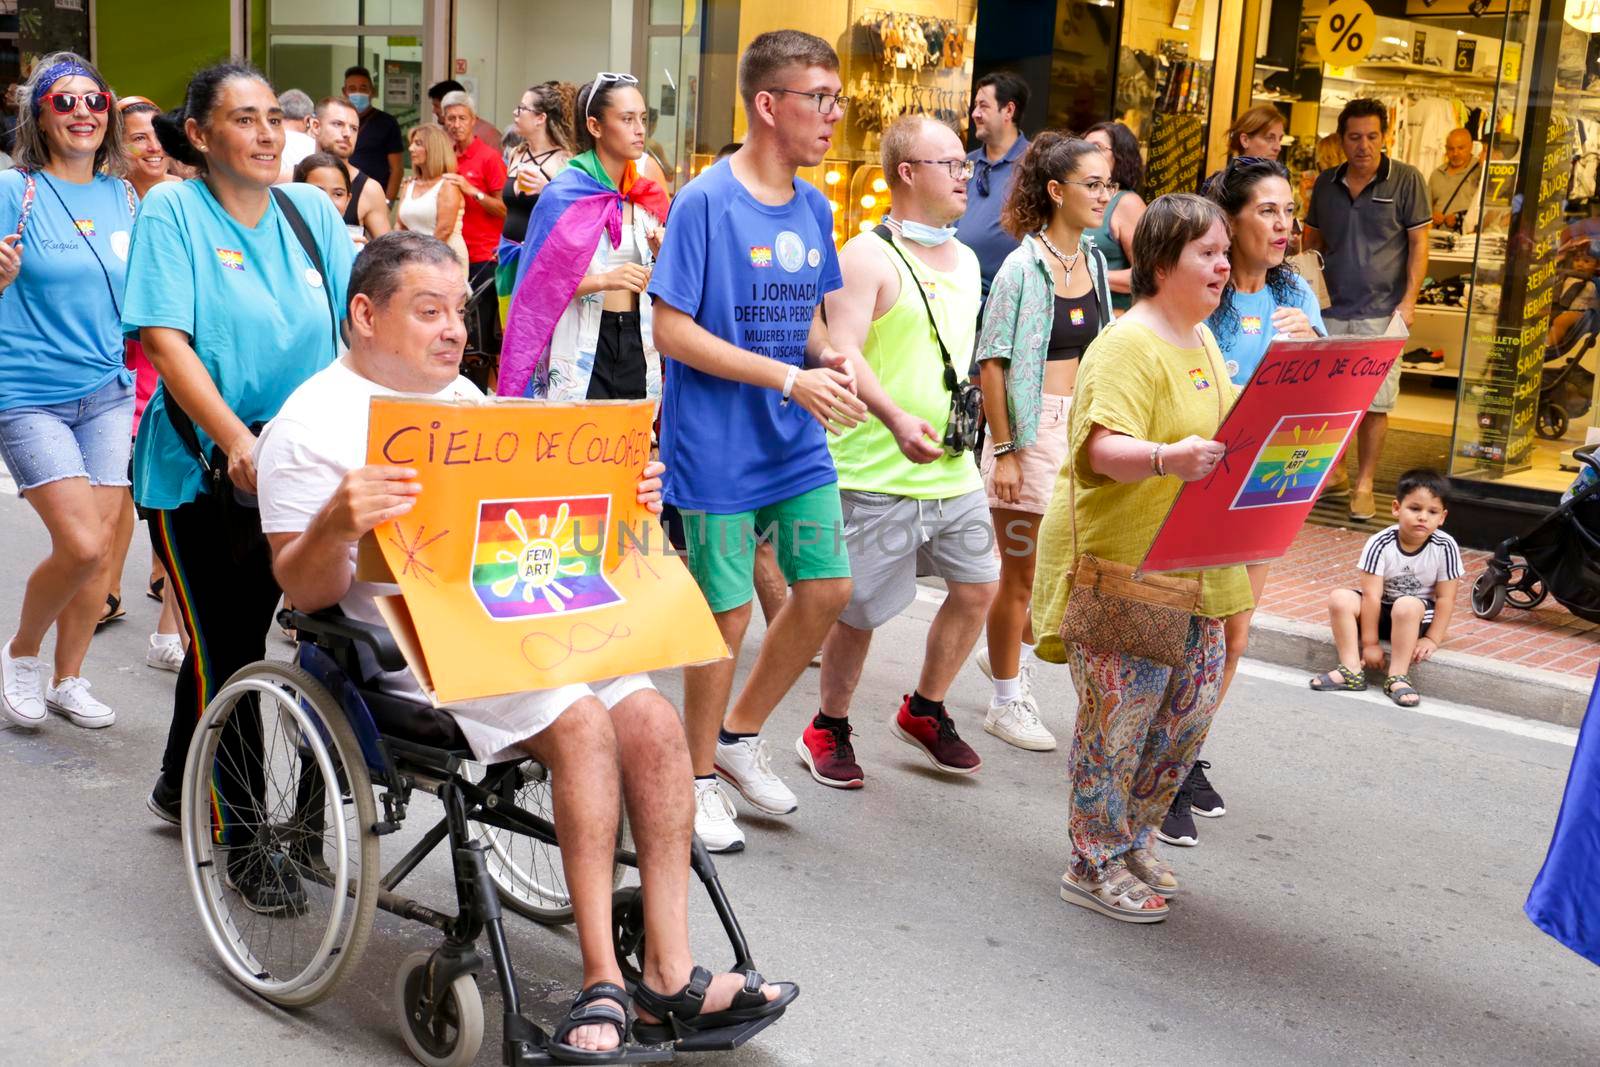 Santa Pola, Alicante, Spain- July 2, 2022: Spanish People with disabilities attending Gay Pride Parade with rainbow flags, banners and colorful costumes